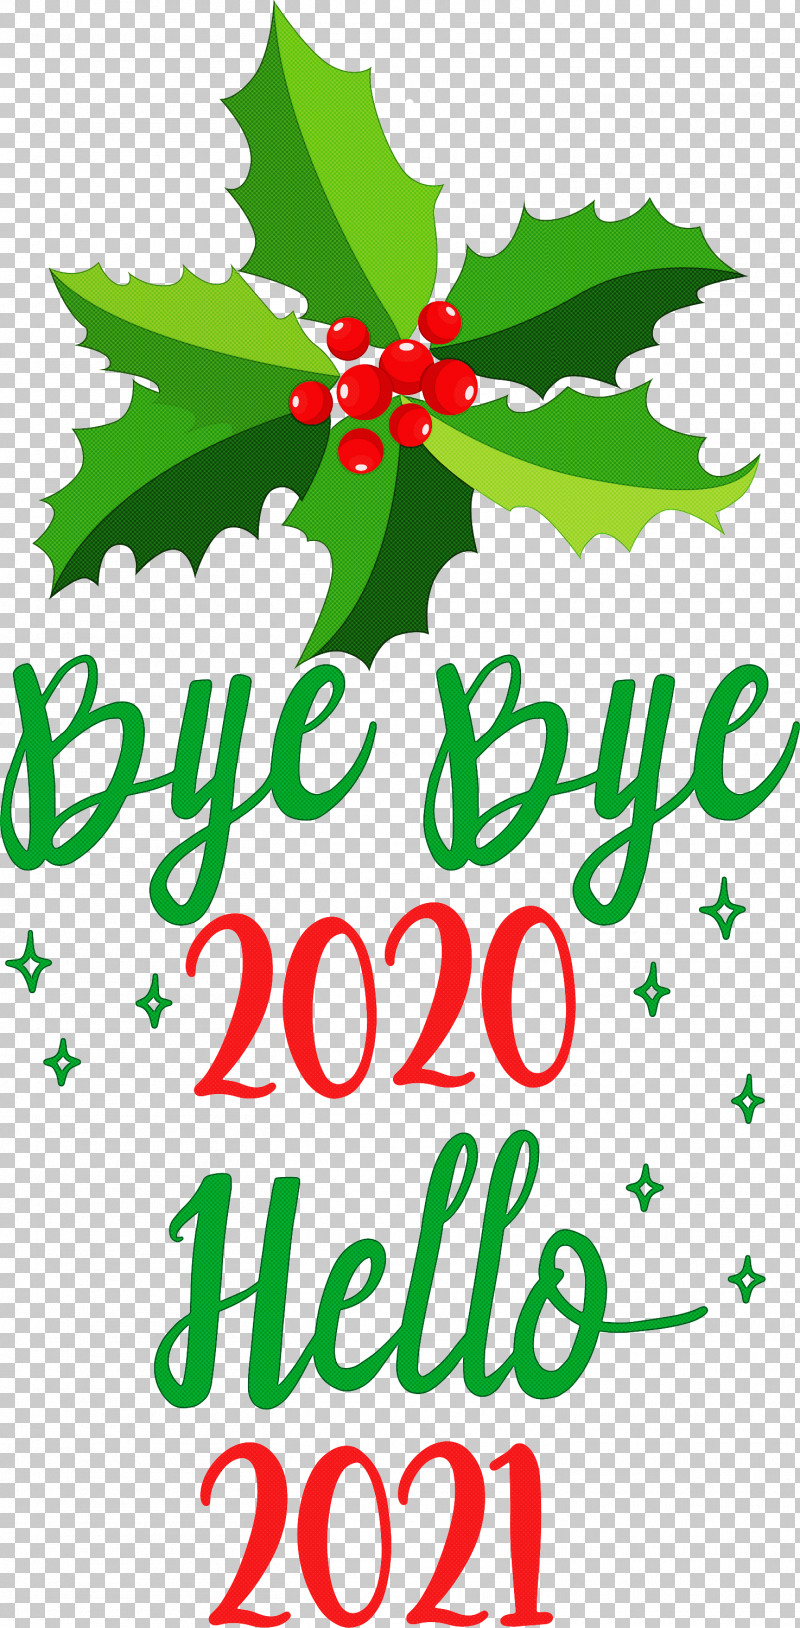 Hello 2021 Year Bye Bye 2020 Year PNG, Clipart, Abstract Art, Bye Bye 2020 Year, Christmas Day, Drawing, Hello 2021 Year Free PNG Download